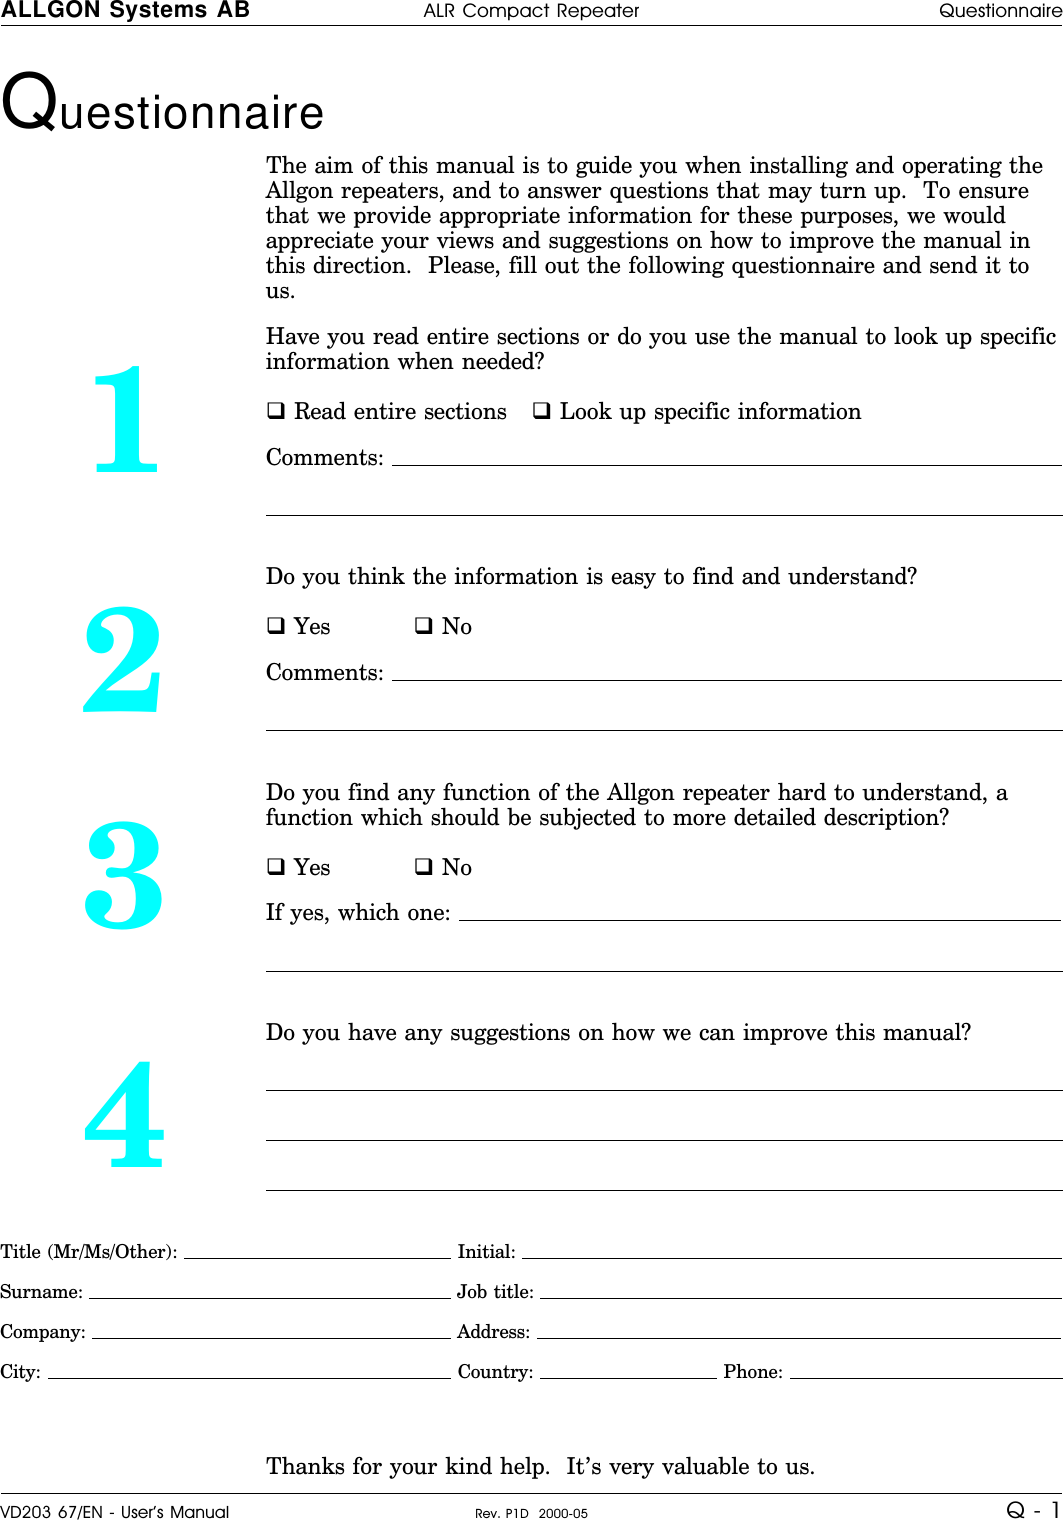 Questionnaire The aim of this manual is to guide you when installing and operating theAllgon repeaters, and to answer questions that may turn up.  To ensurethat we provide appropriate information for these purposes, we wouldappreciate your views and suggestions on how to improve the manual inthis direction.  Please, fill out the following questionnaire and send it tous.1Have you read entire sections or do you use the manual to look up specificinformation when needed?q Read entire sections q Look up specific informationComments: 2Do you think the information is easy to find and understand?q Yes q NoComments: 3Do you find any function of the Allgon repeater hard to understand, afunction which should be subjected to more detailed description?q Yes q NoIf yes, which one: 4Do you have any suggestions on how we can improve this manual?Title (Mr/Ms/Other):   Initial: Surname:  Job title: Company:  Address: City:   Country:   Phone: Thanks for your kind help.  It’s very valuable to us.ALLGON Systems AB ALR Compact Repeater QuestionnaireVD203 67/EN - User’s Manual Rev. P1D  2000-05 Q - 1